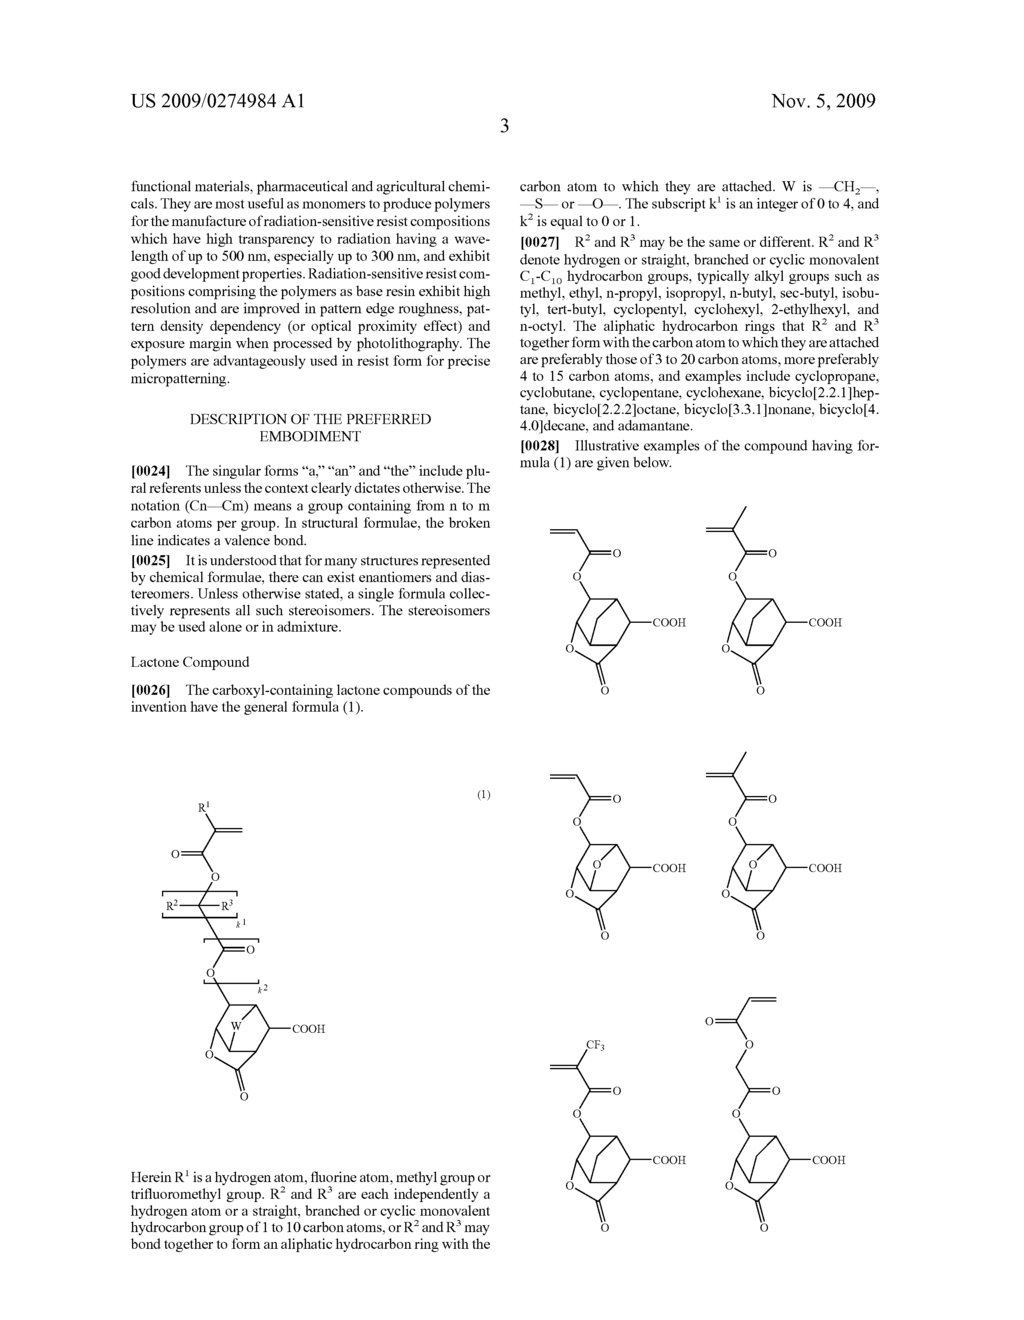 CARBOXYL-CONTAINING LACTONE COMPOUND, POLYMER, RESIST COMPOSITION, AND PATTERNING PROCESS - diagram, schematic, and image 04